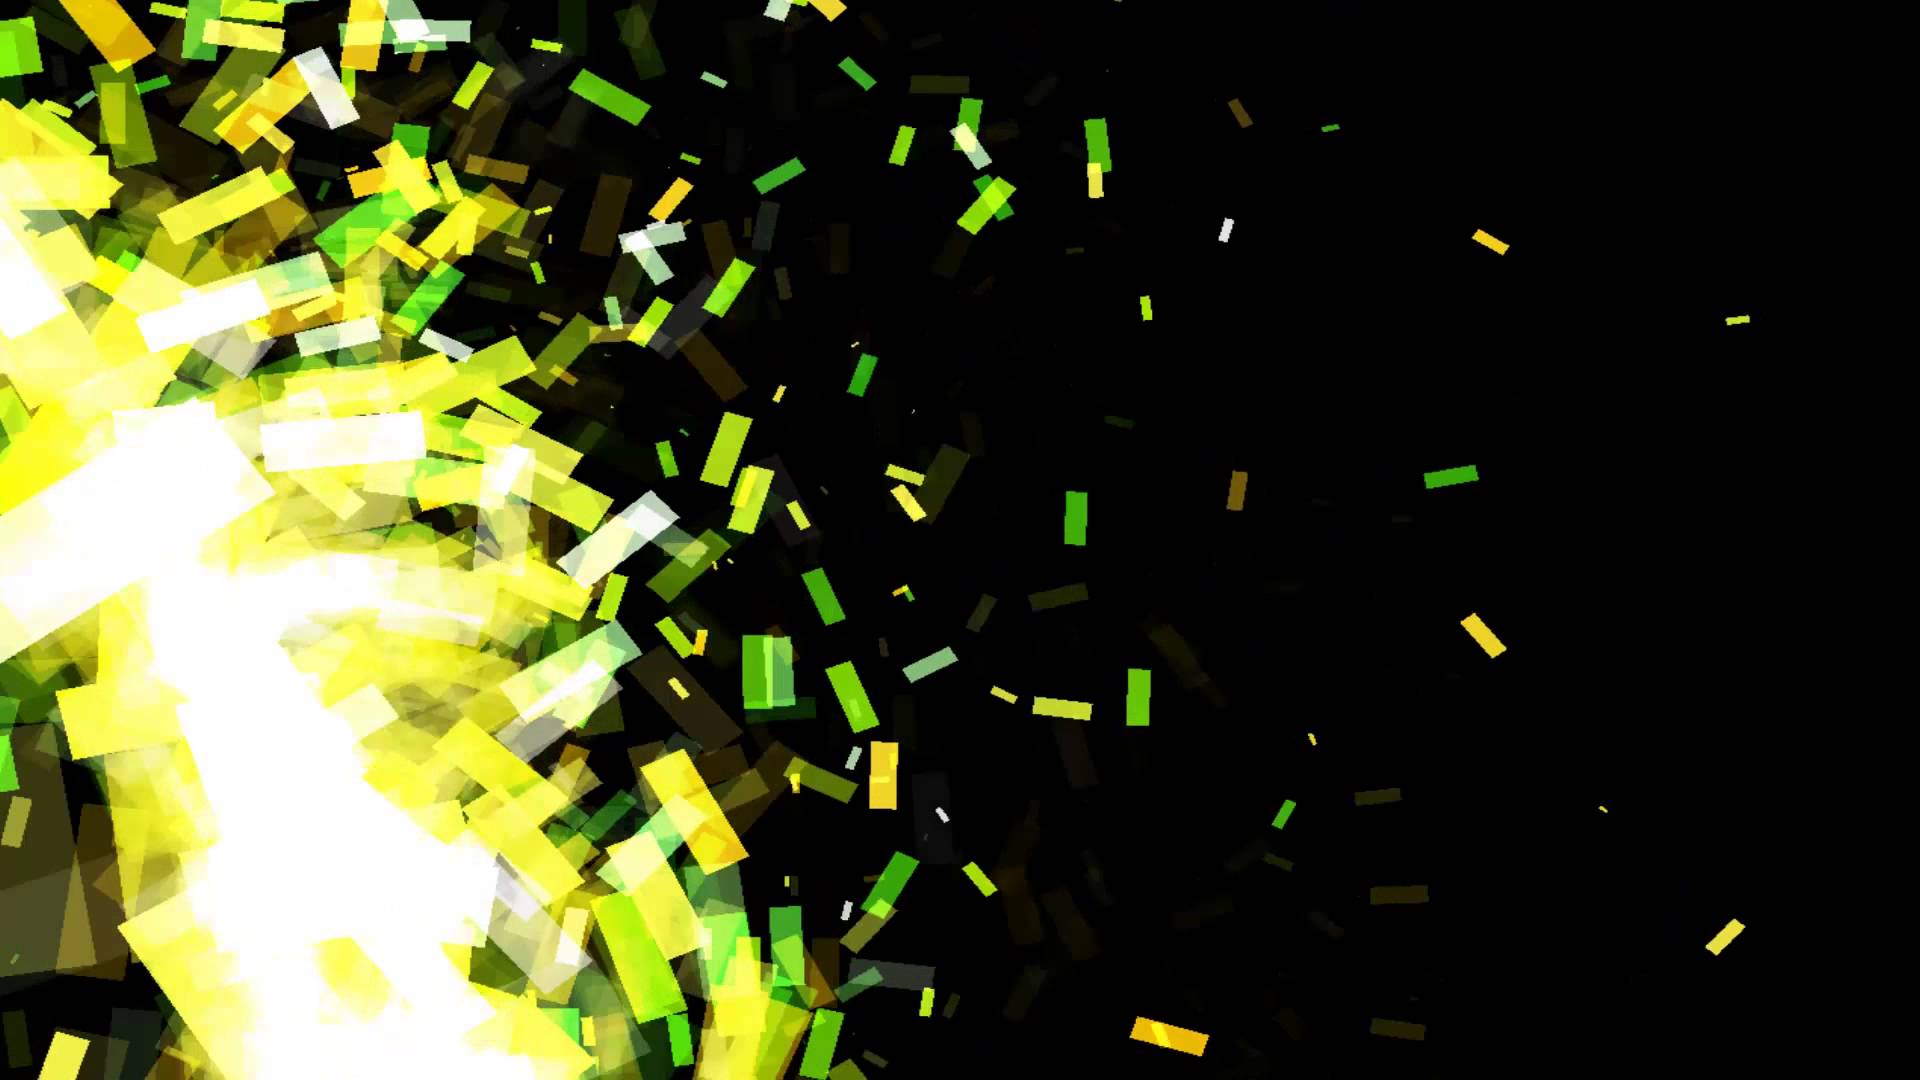 Square Vj Green & Yellow Black Background ANIMATION FREE FOOTAGE HD